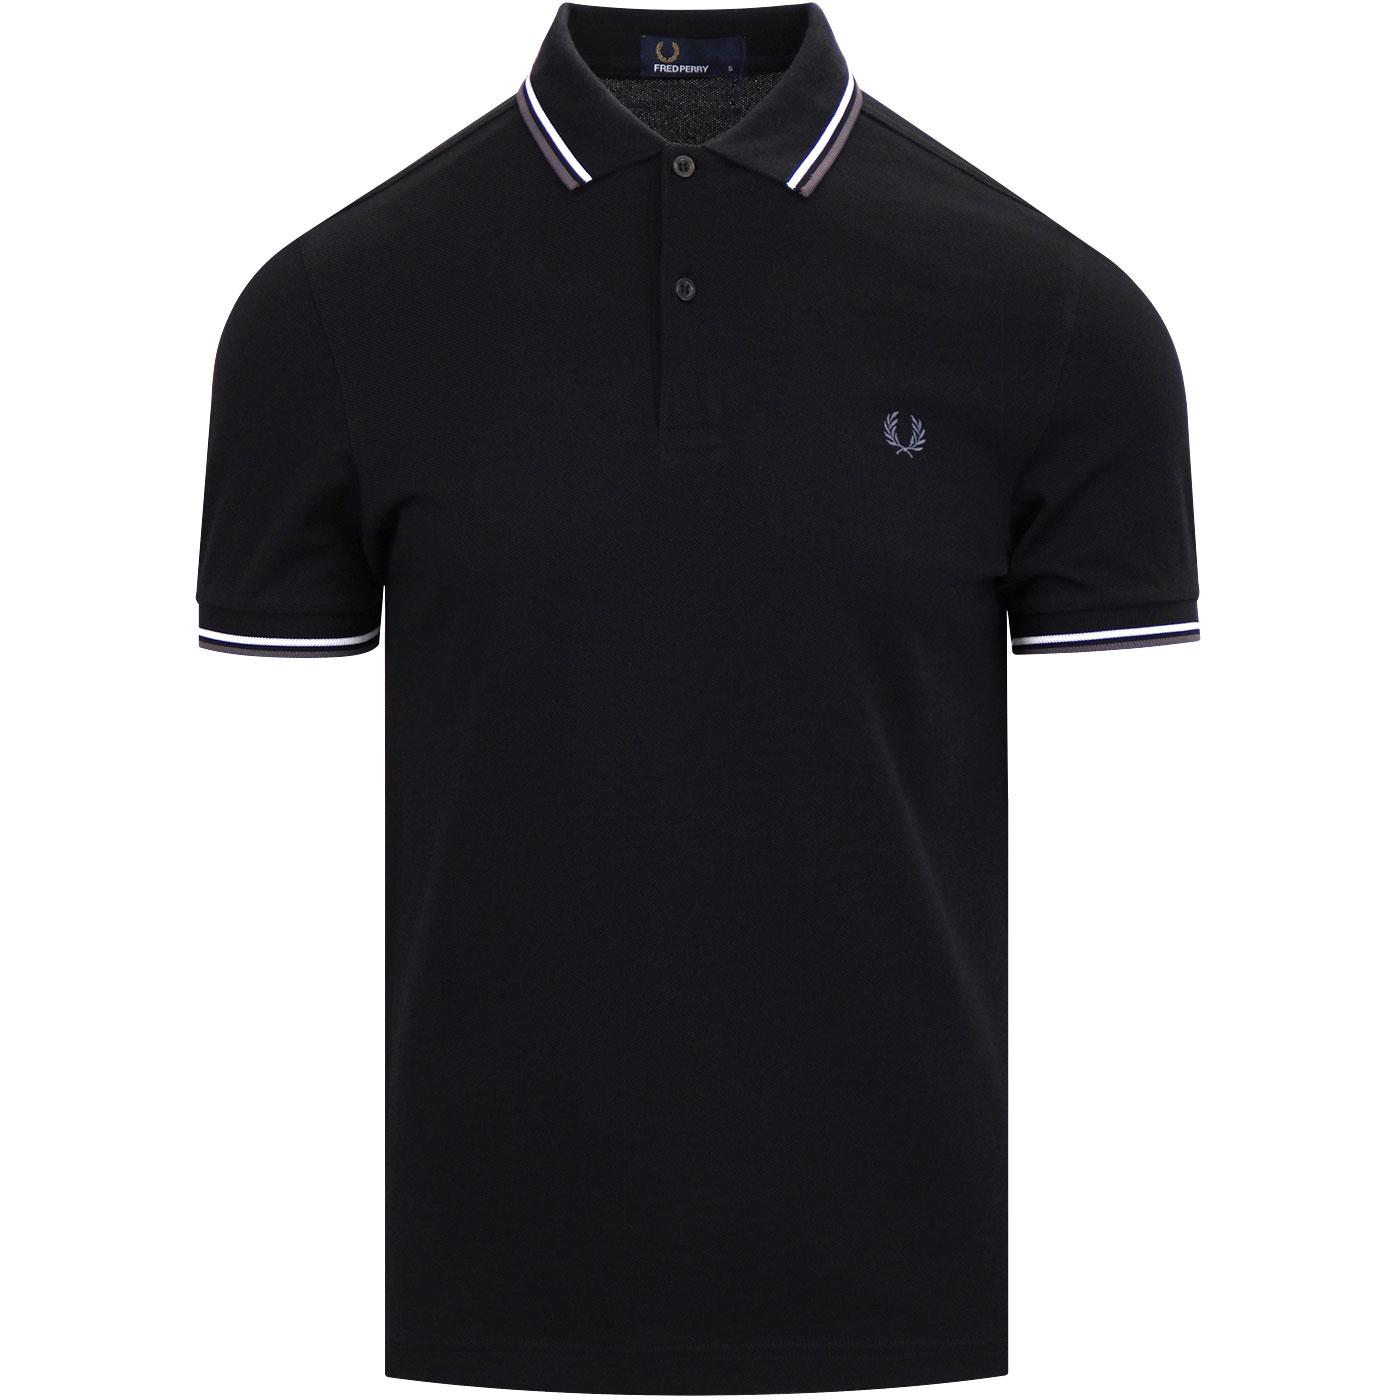 FRED PERRY M3600 Men's Mod Twin Tipped Polo in B/W/G